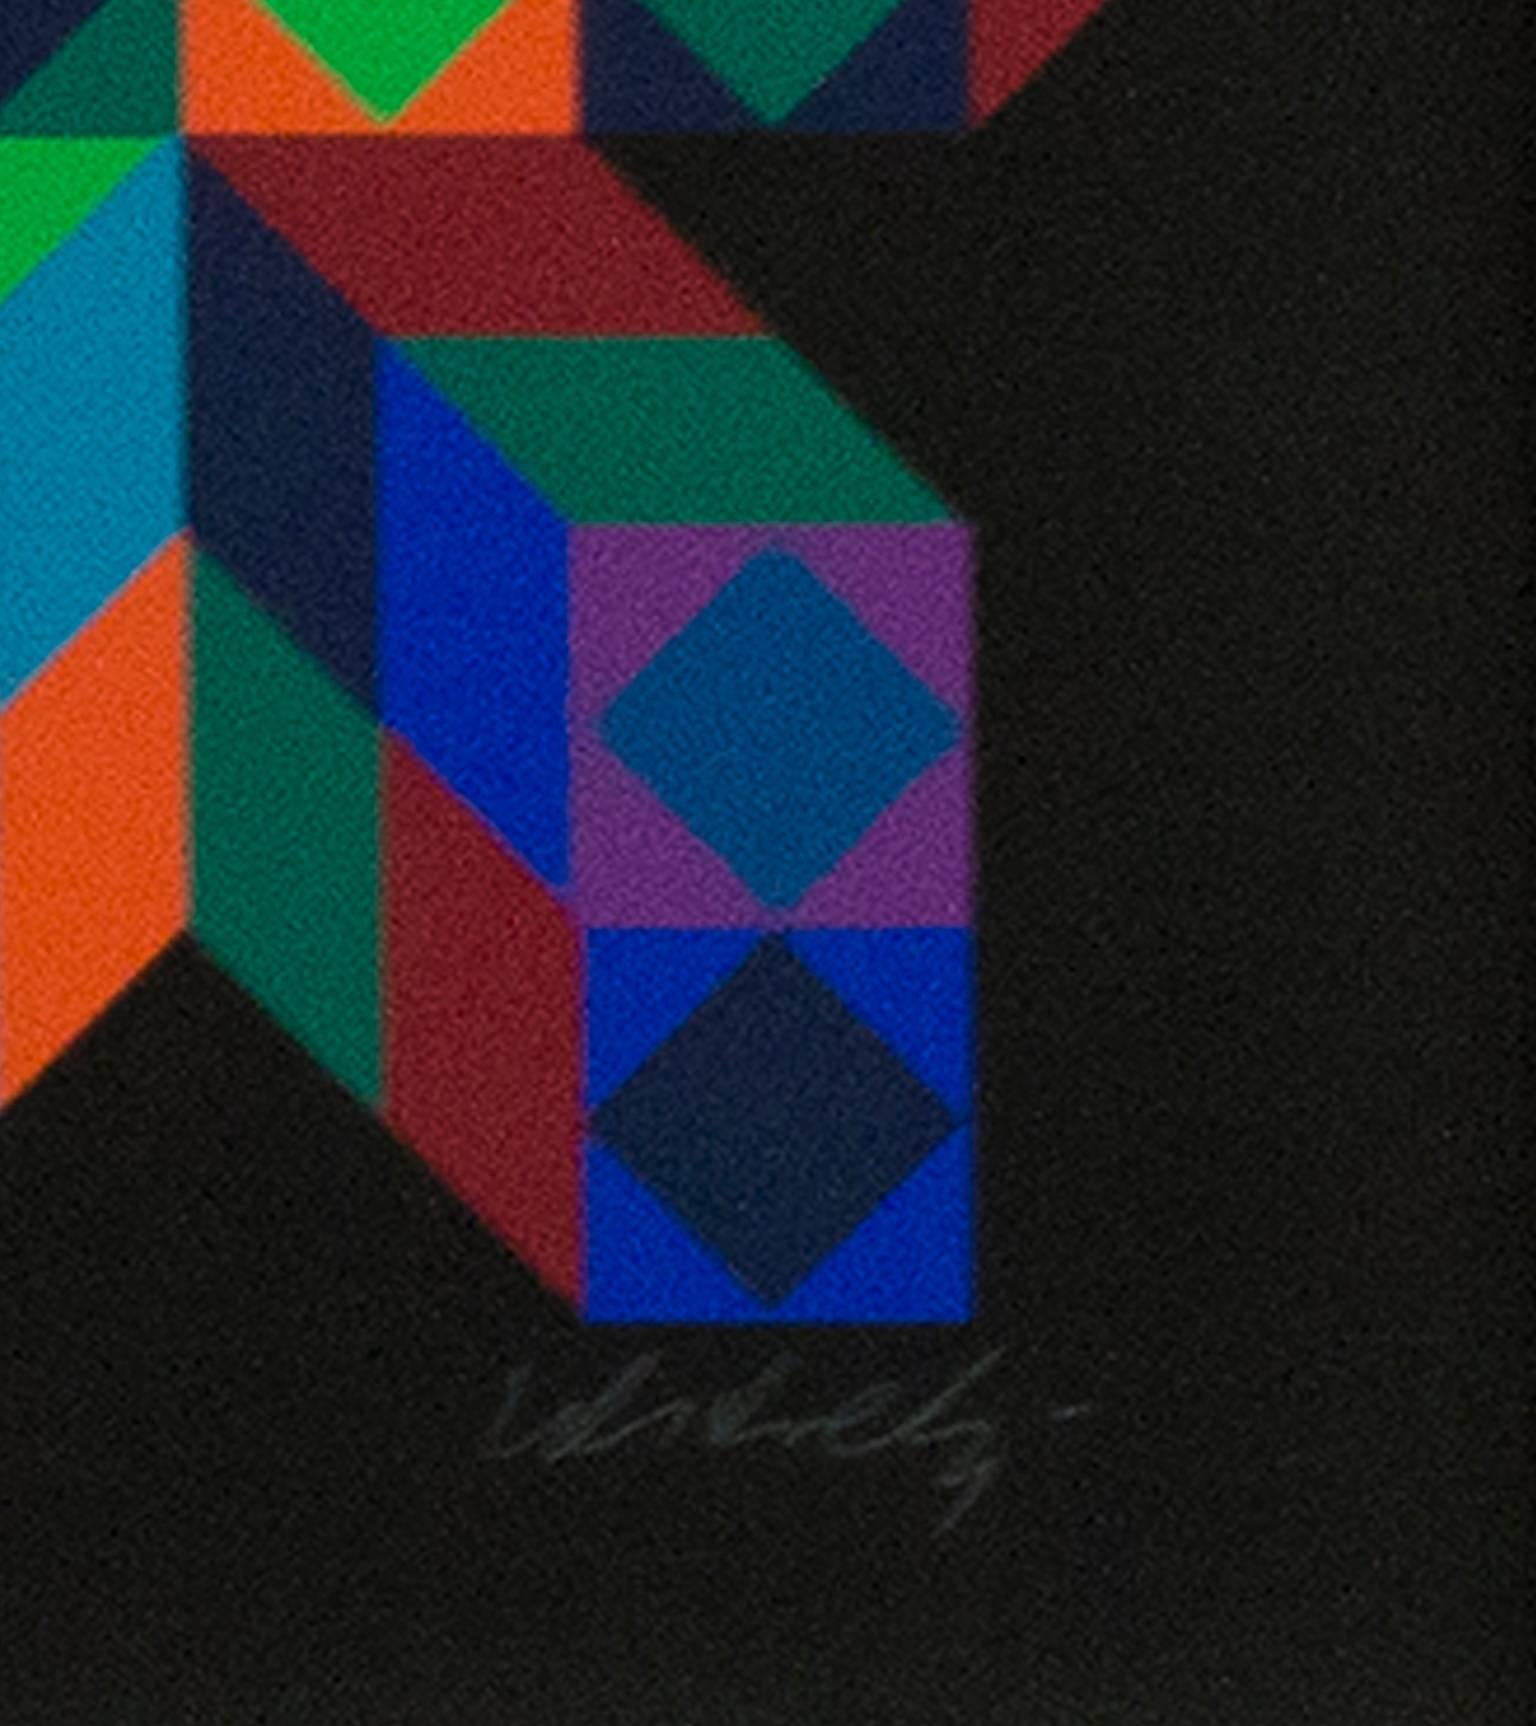 F.V. 37/72 - Op Art Print by Victor Vasarely